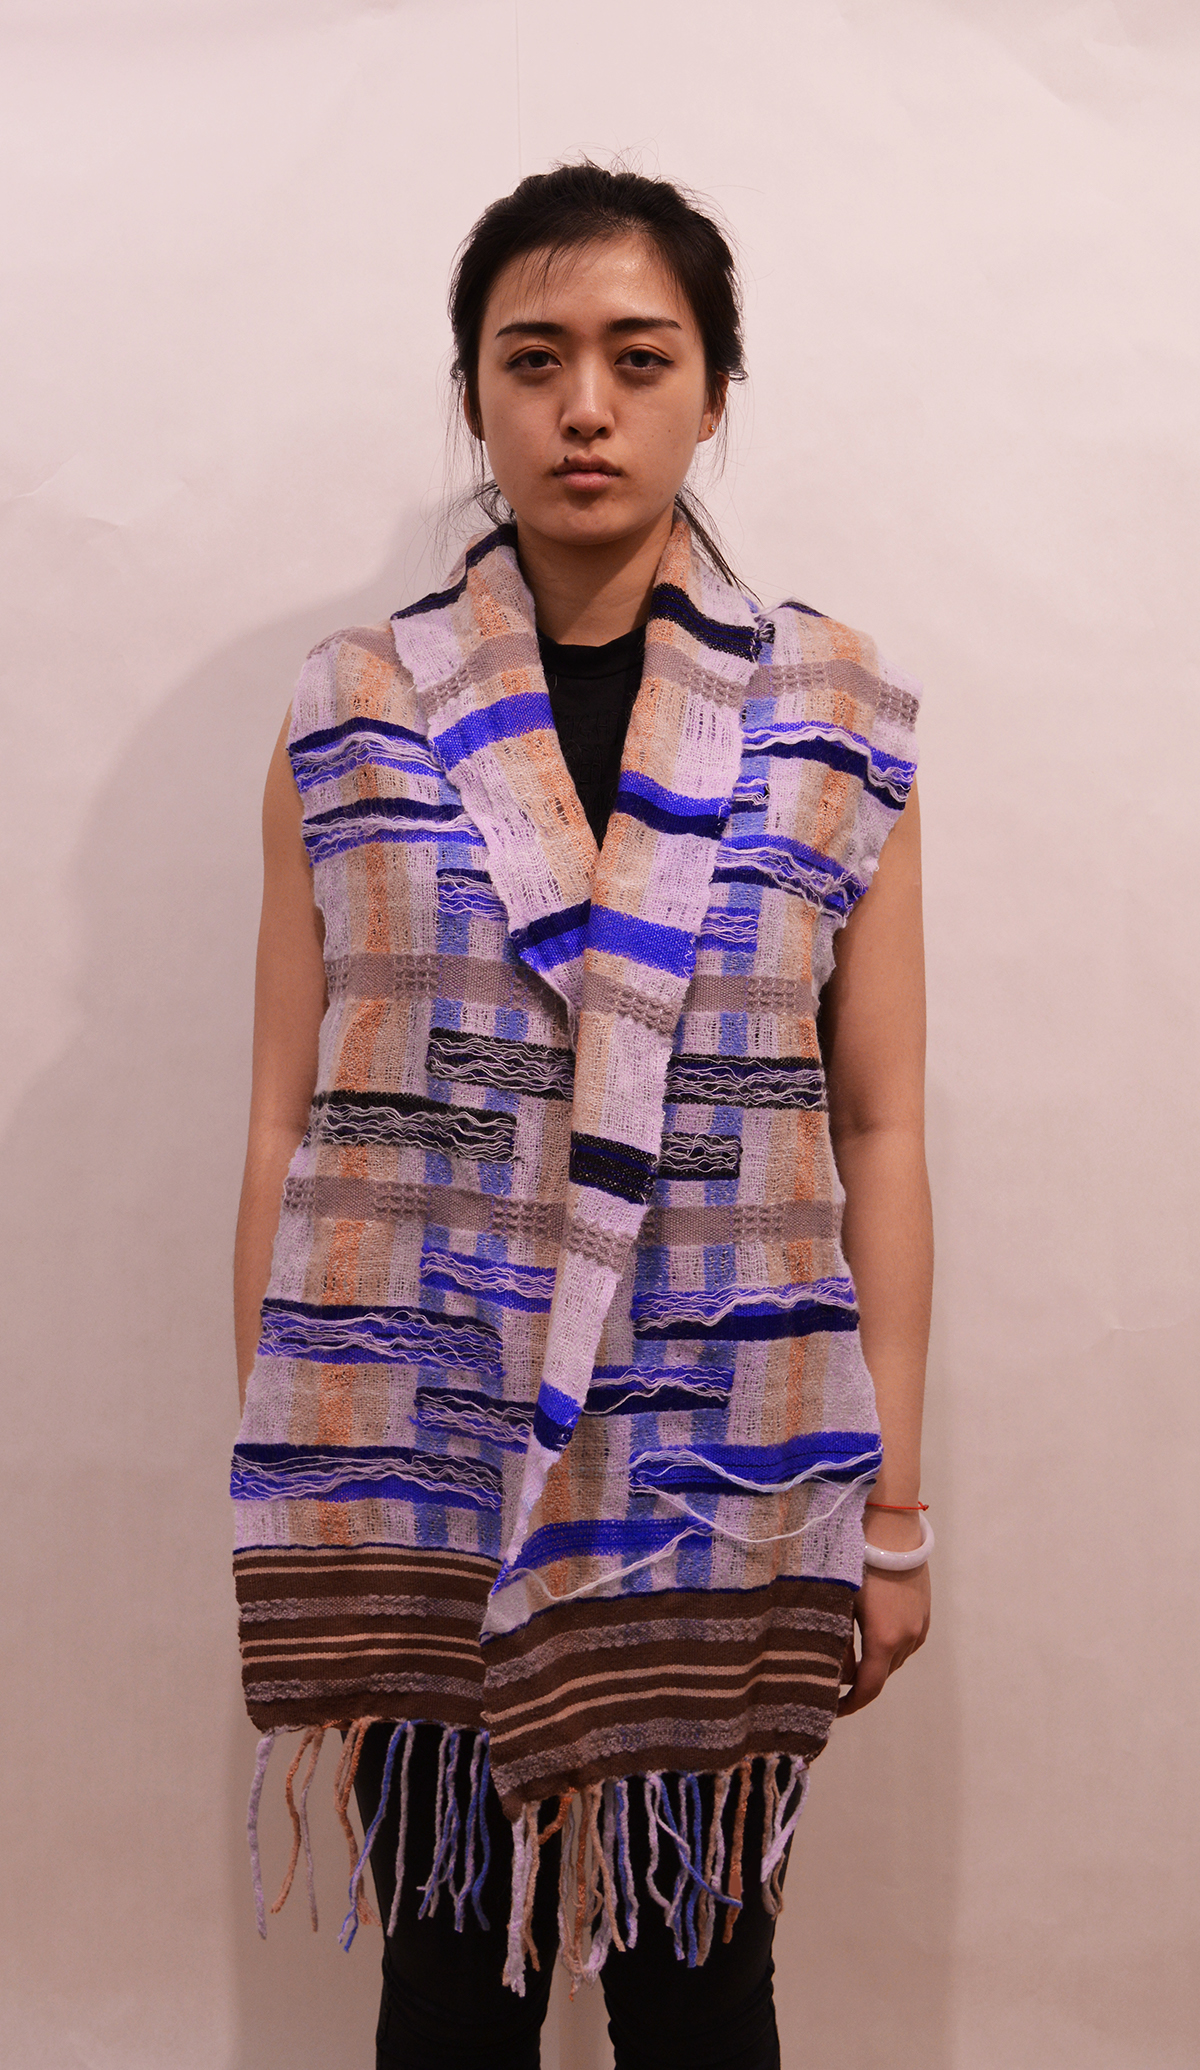 beijing pollution Air Pollution china pollution weave 8-harness wool scarf Hand-loom apparel